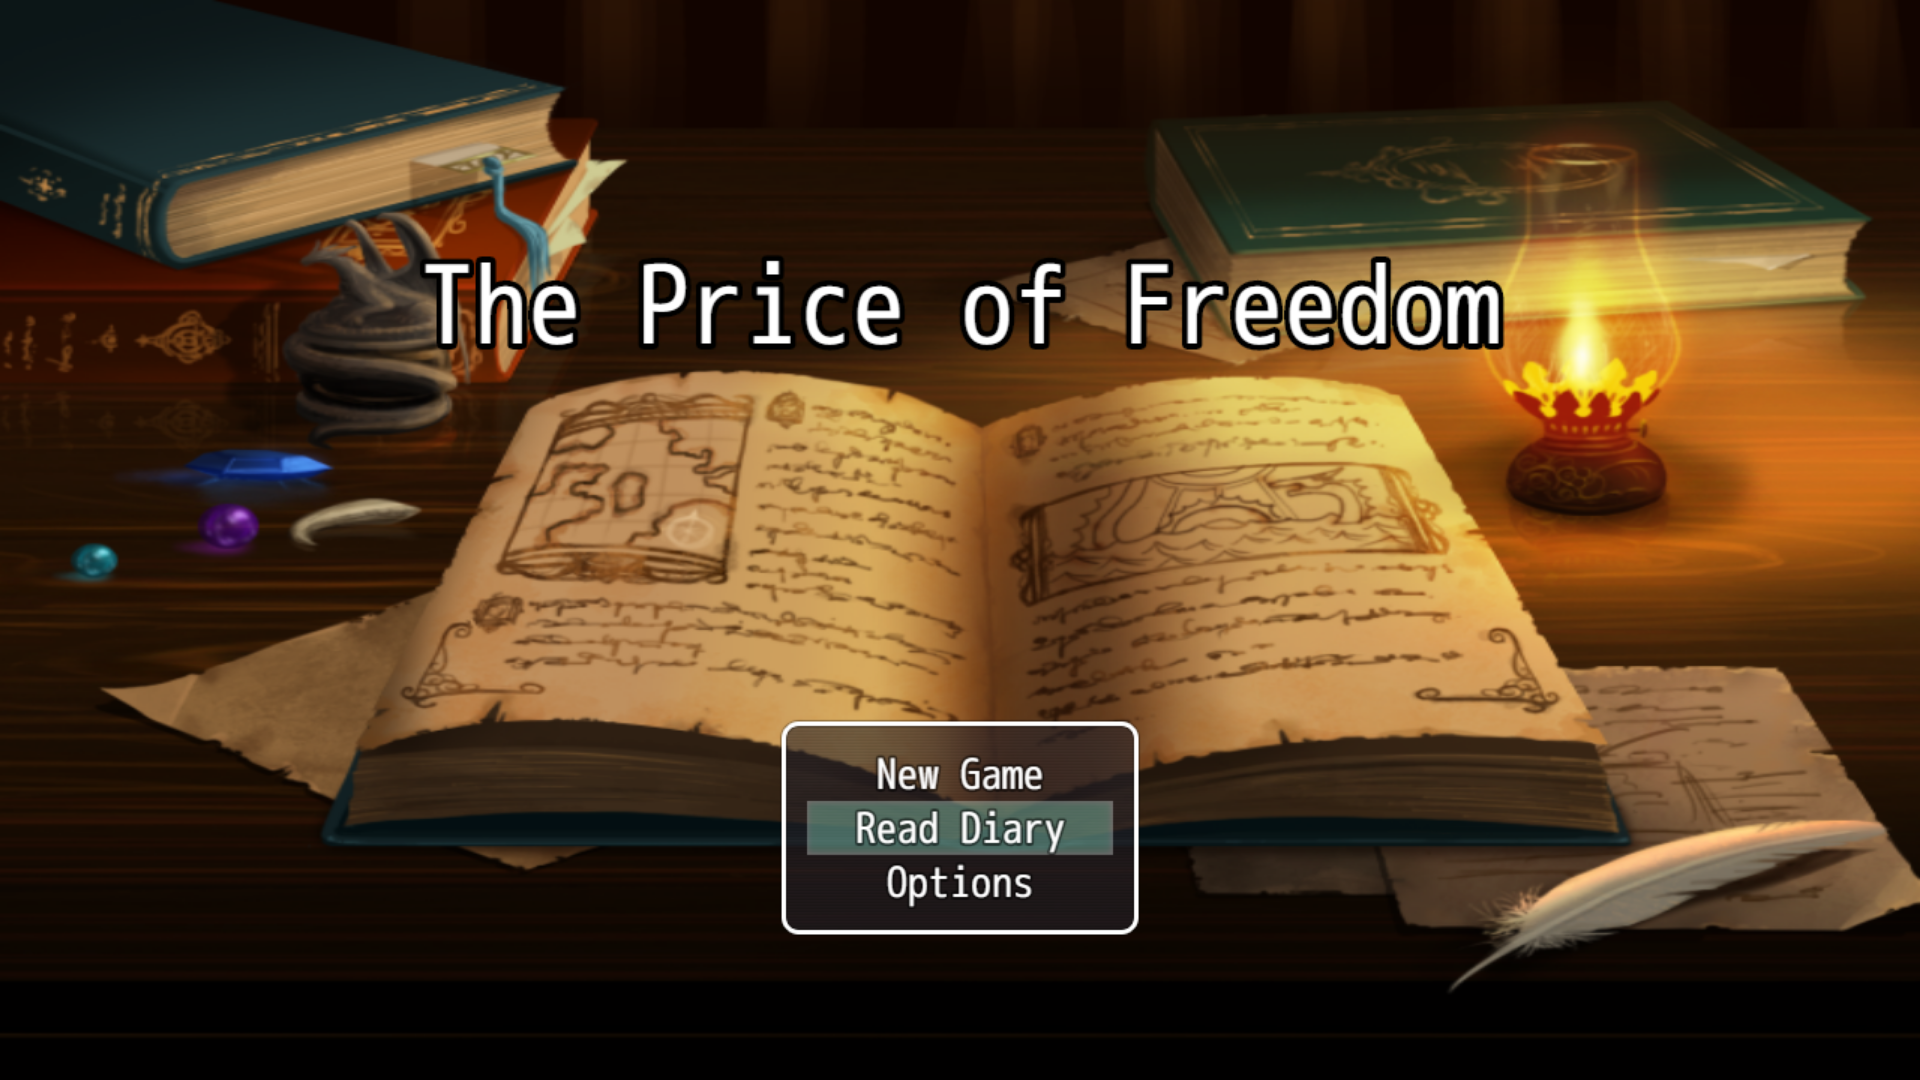 The Price of Freedom by AceOfAces